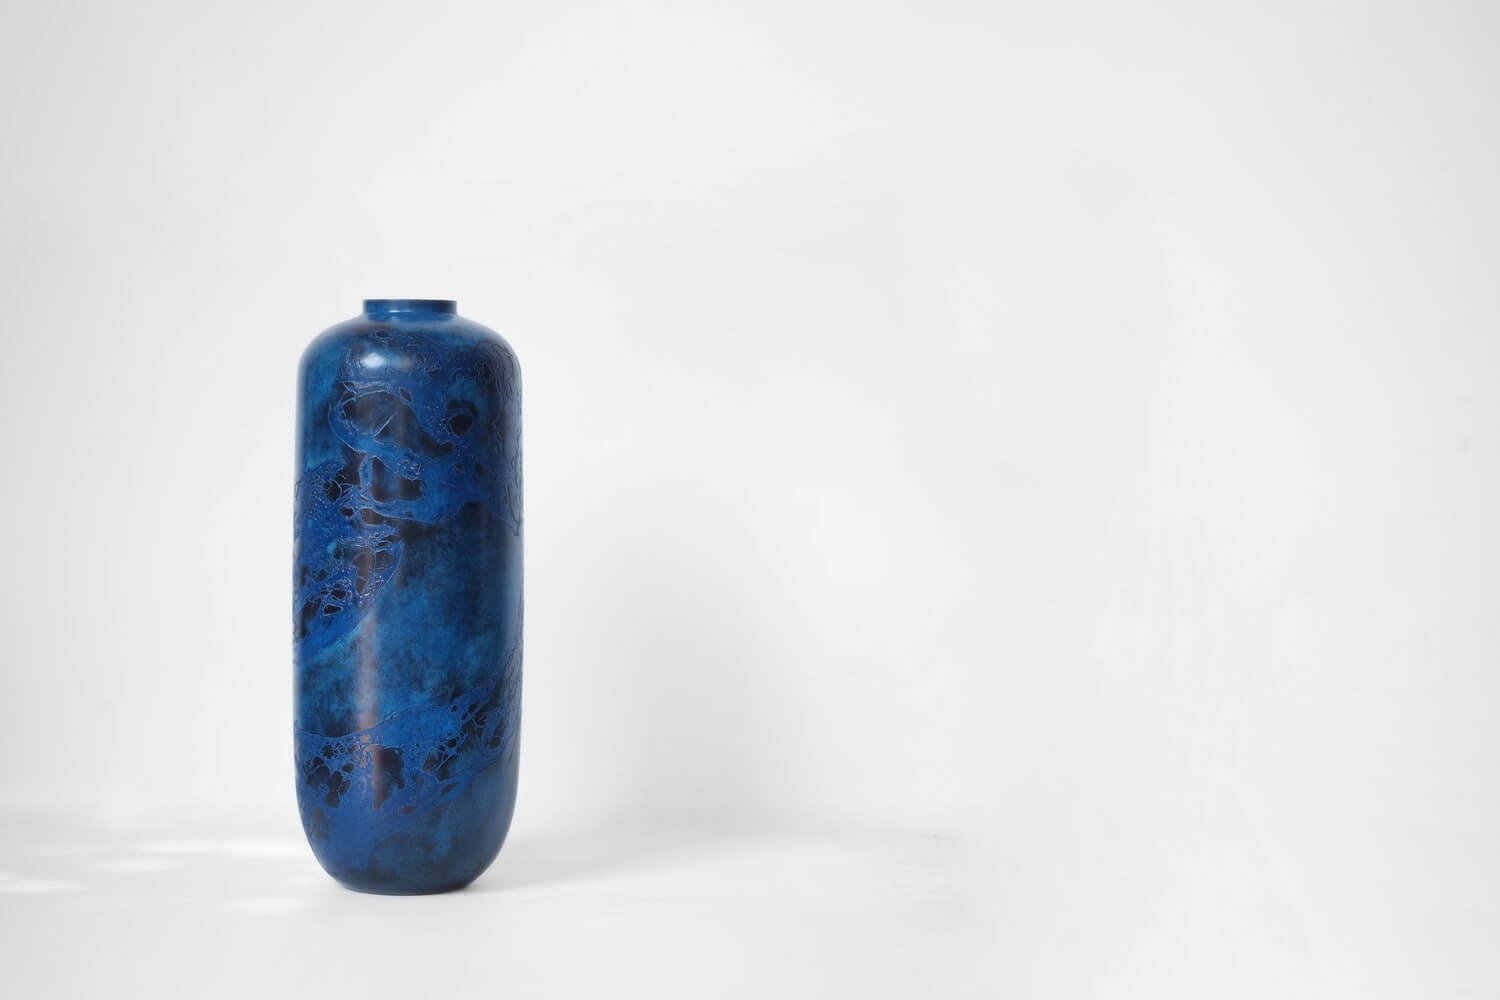 A tall rounded deep blue vase.